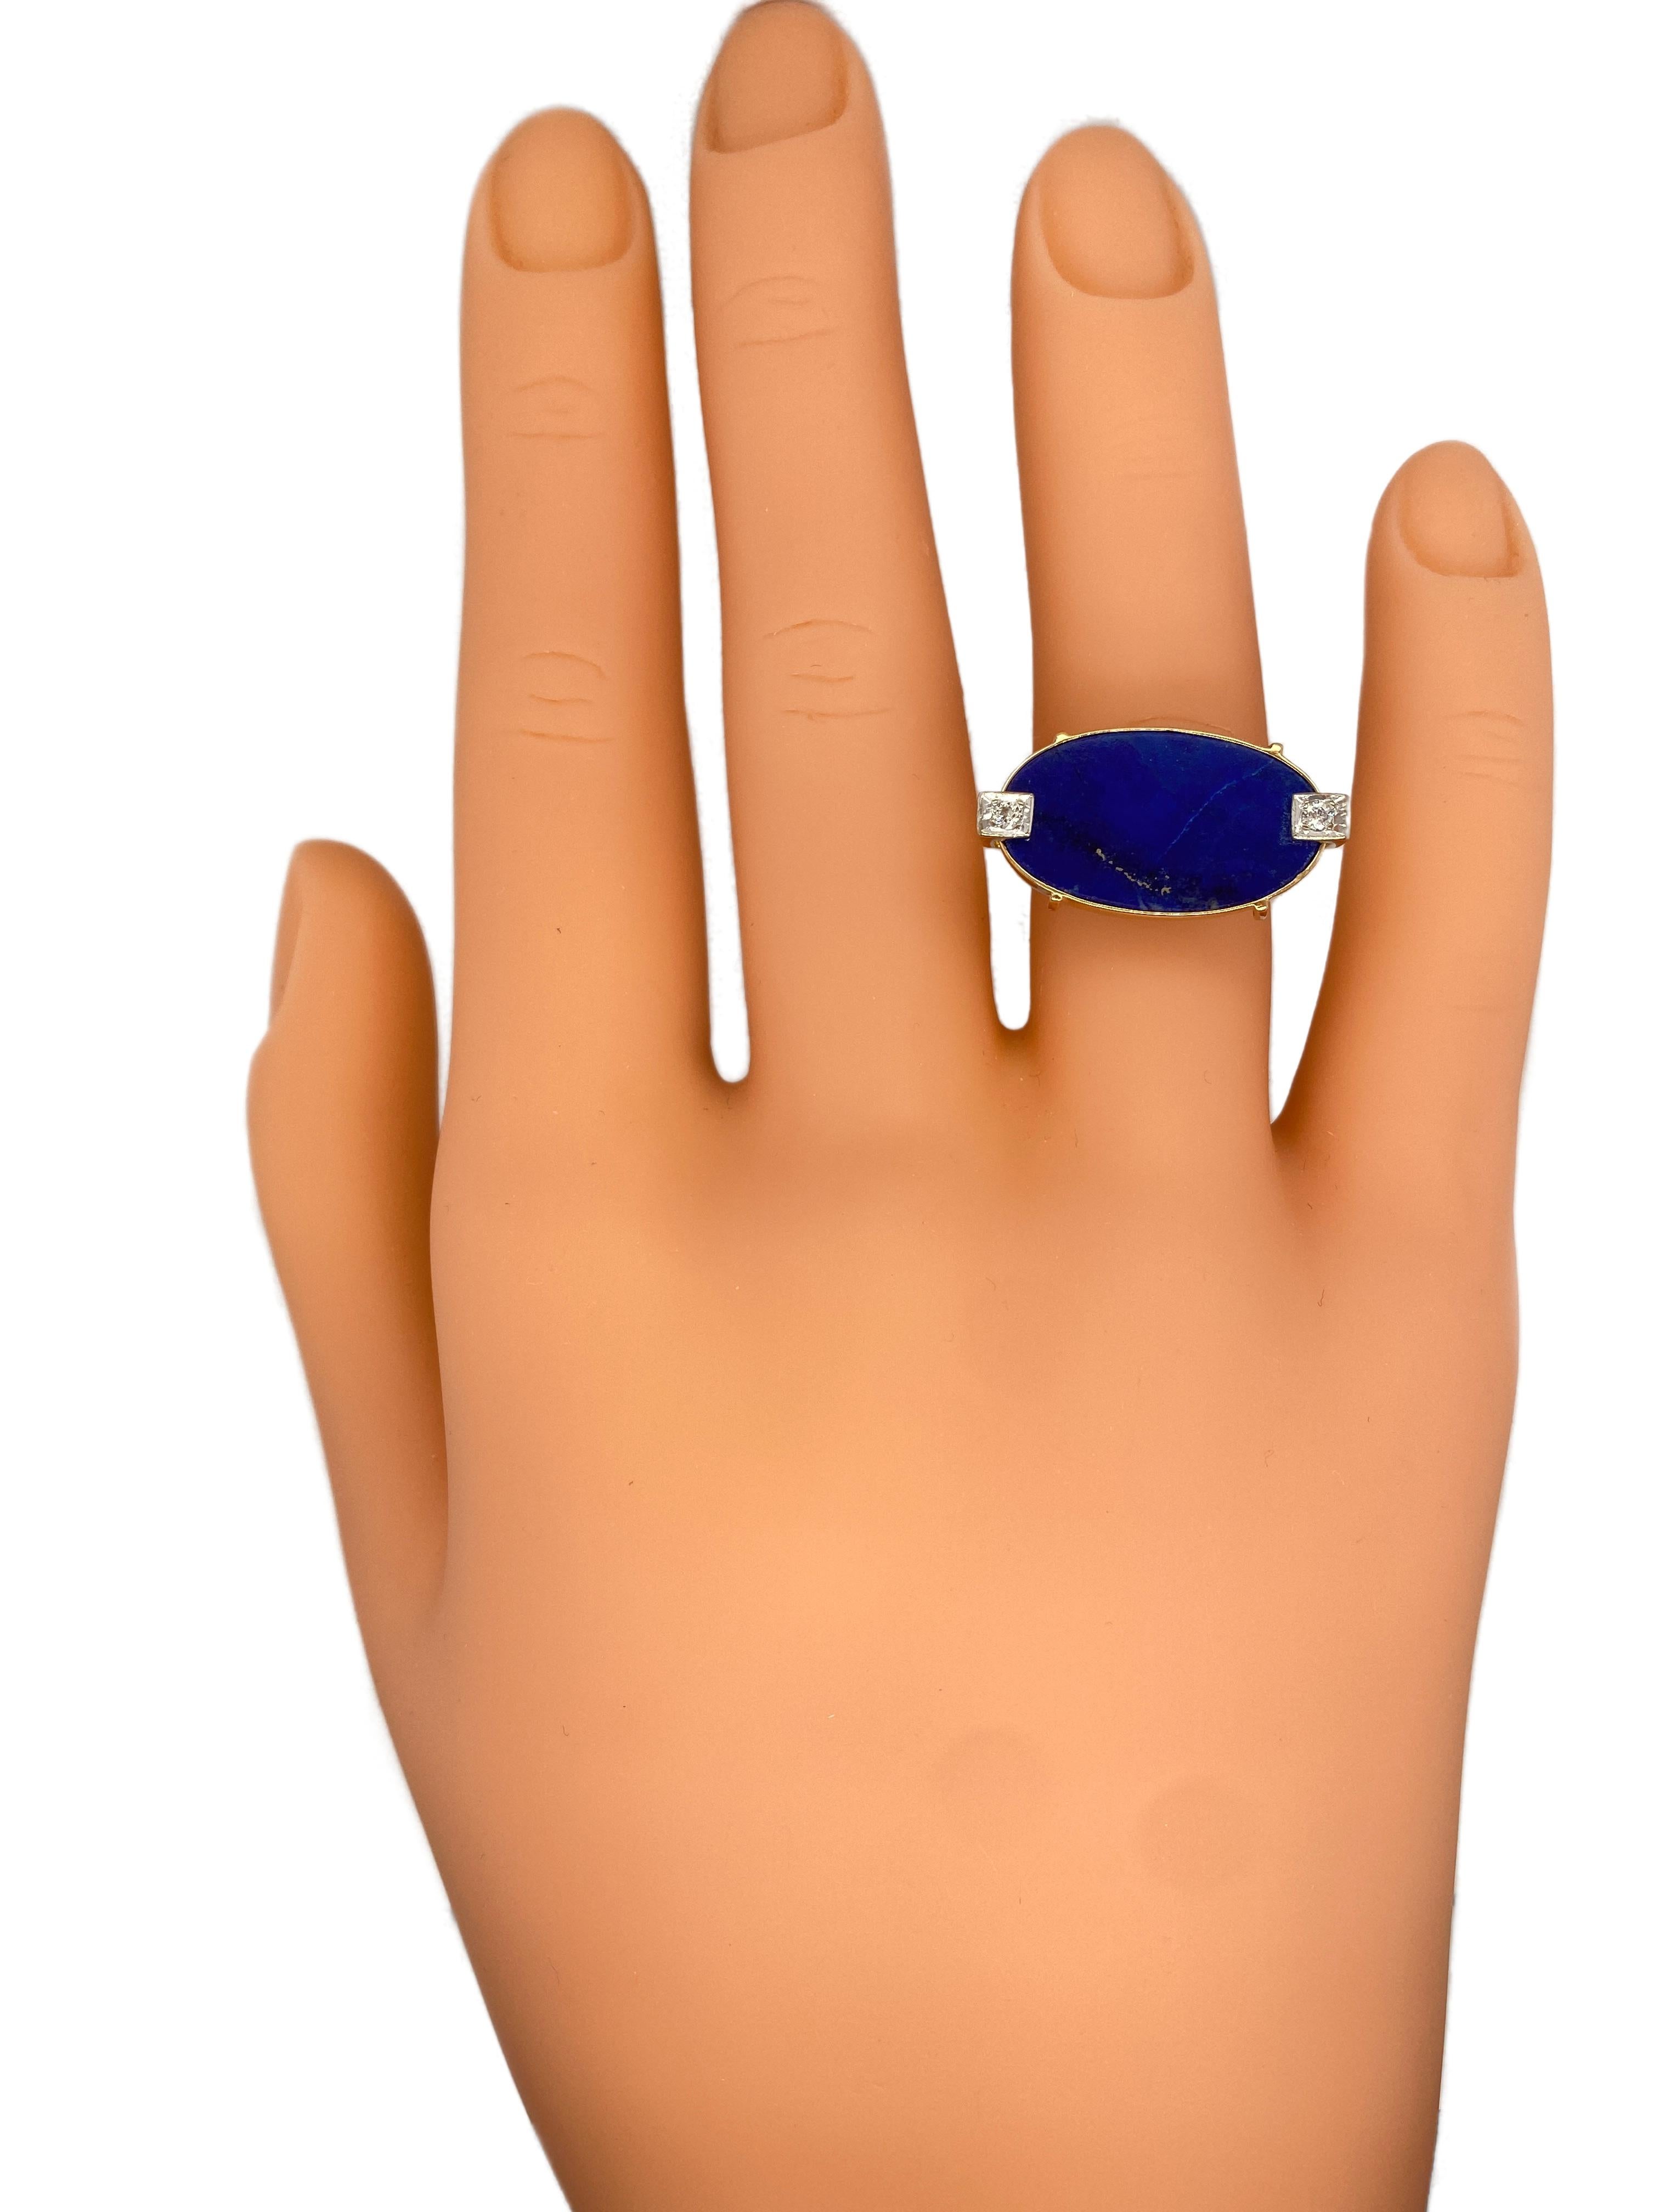 Circa 1960s Retro East-West Oval Lapis Lazuli and Diamond Ring in 14K Gold In Good Condition For Sale In Addison, TX